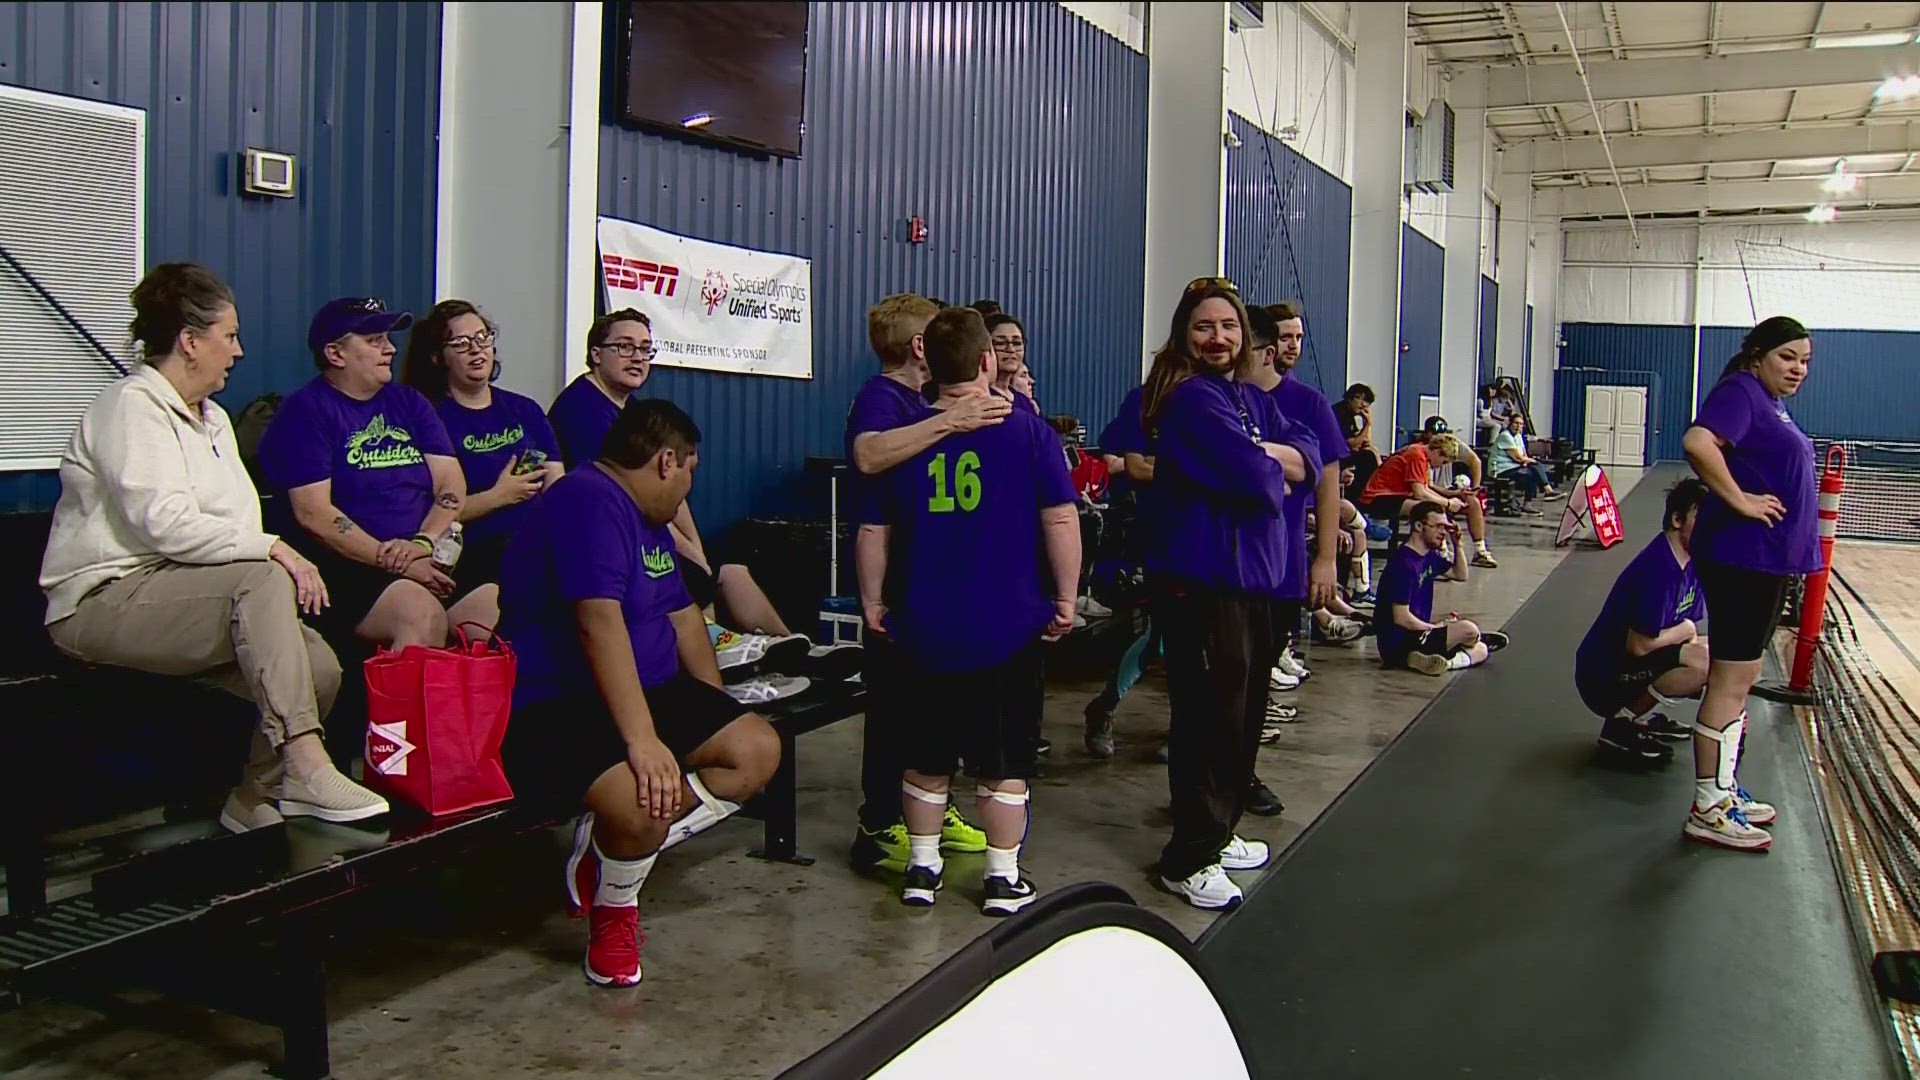 TONIGHT, THE ANNUAL WINTER GAMES FOR SPECIAL OLYMPICS ARKANSAS HAVE WRAPPED UP IN SPRINGDALE... AFTER A DAY FULL OF FUN....